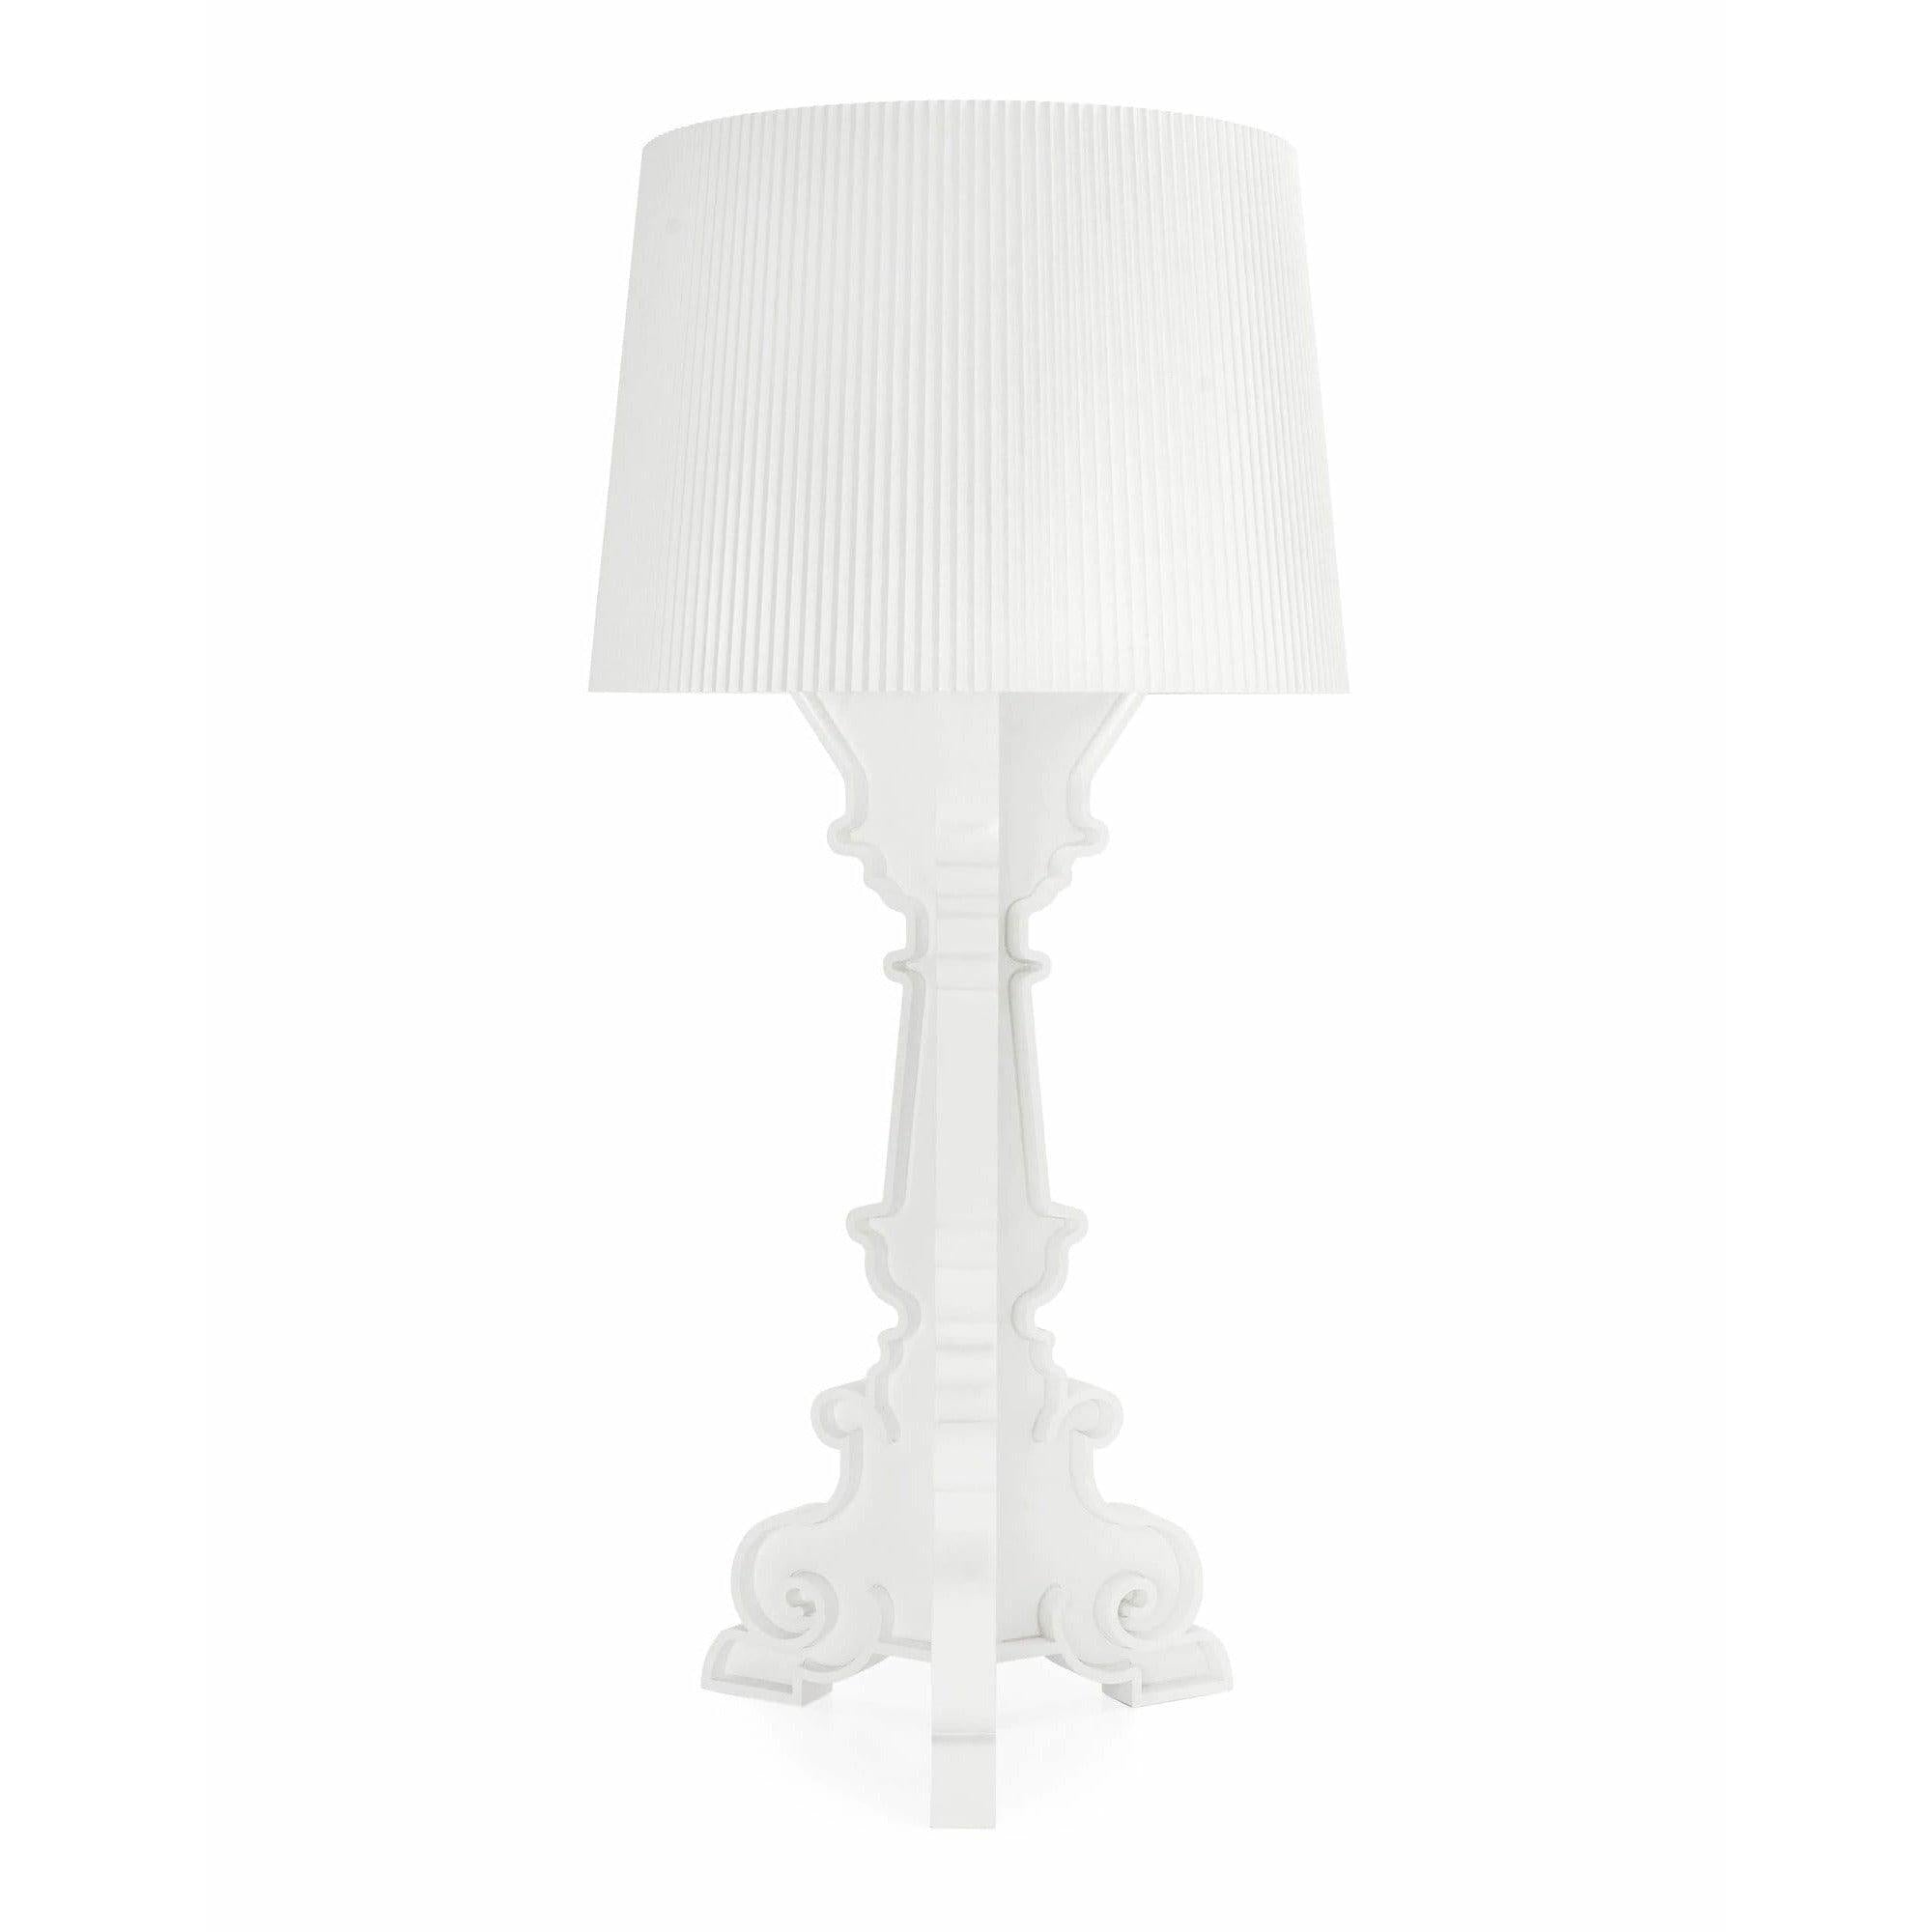 Primitief Demon Play Permanent Bourgie Table Lamp with Dimmer by Kartell exclusively through Curated